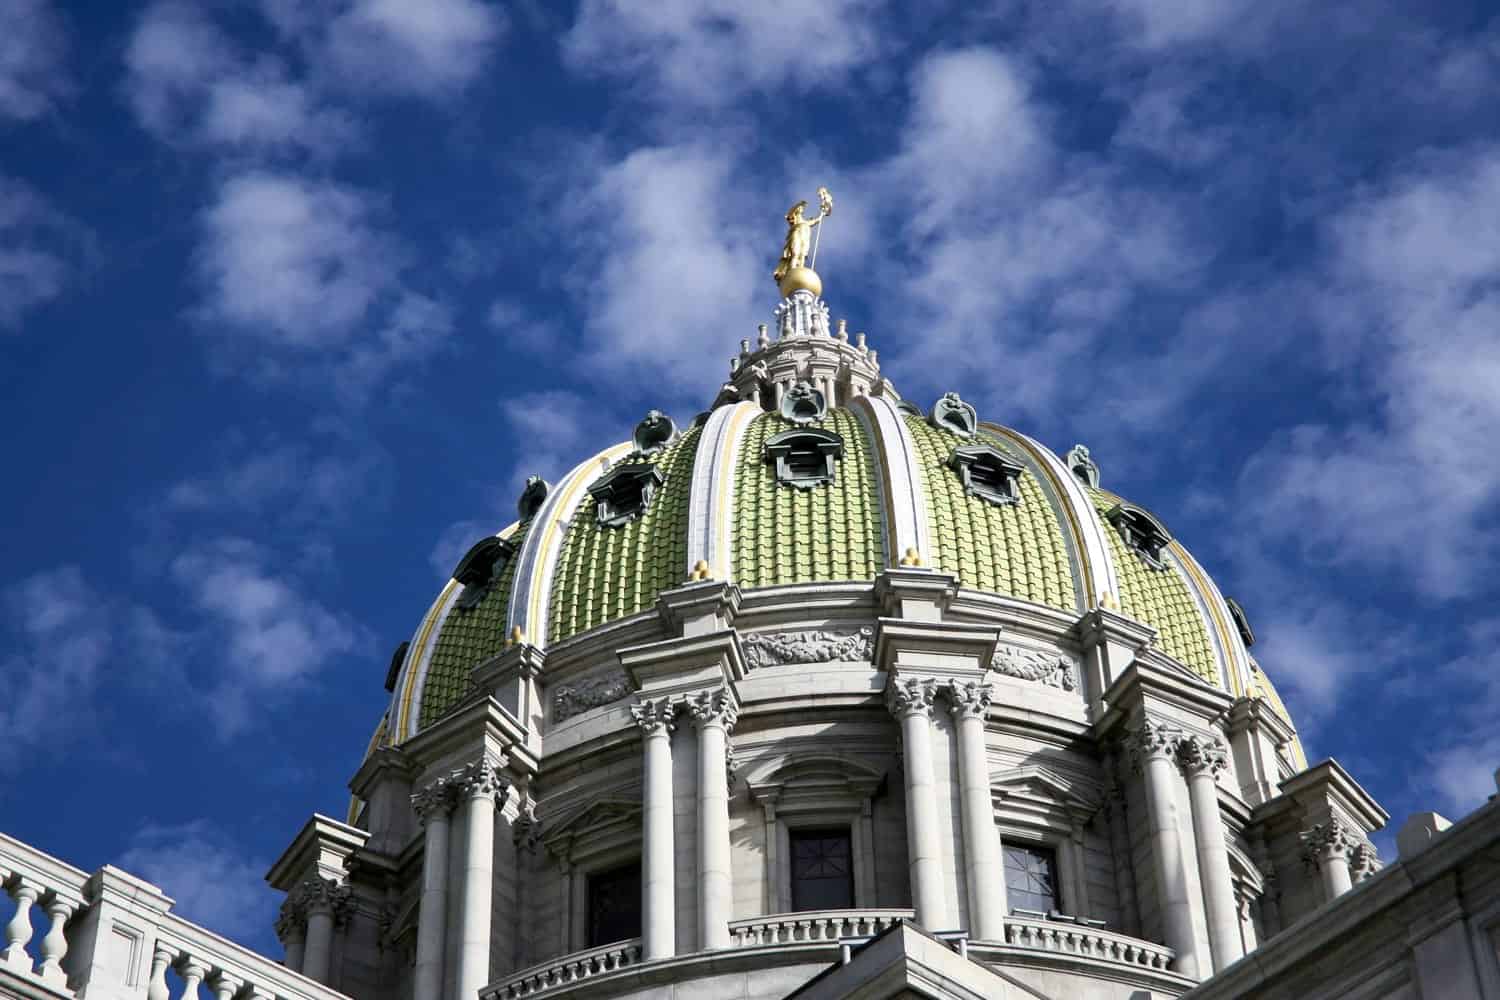 PA.GOV | The Official Website for the Commonwealth of Pennsylvania.